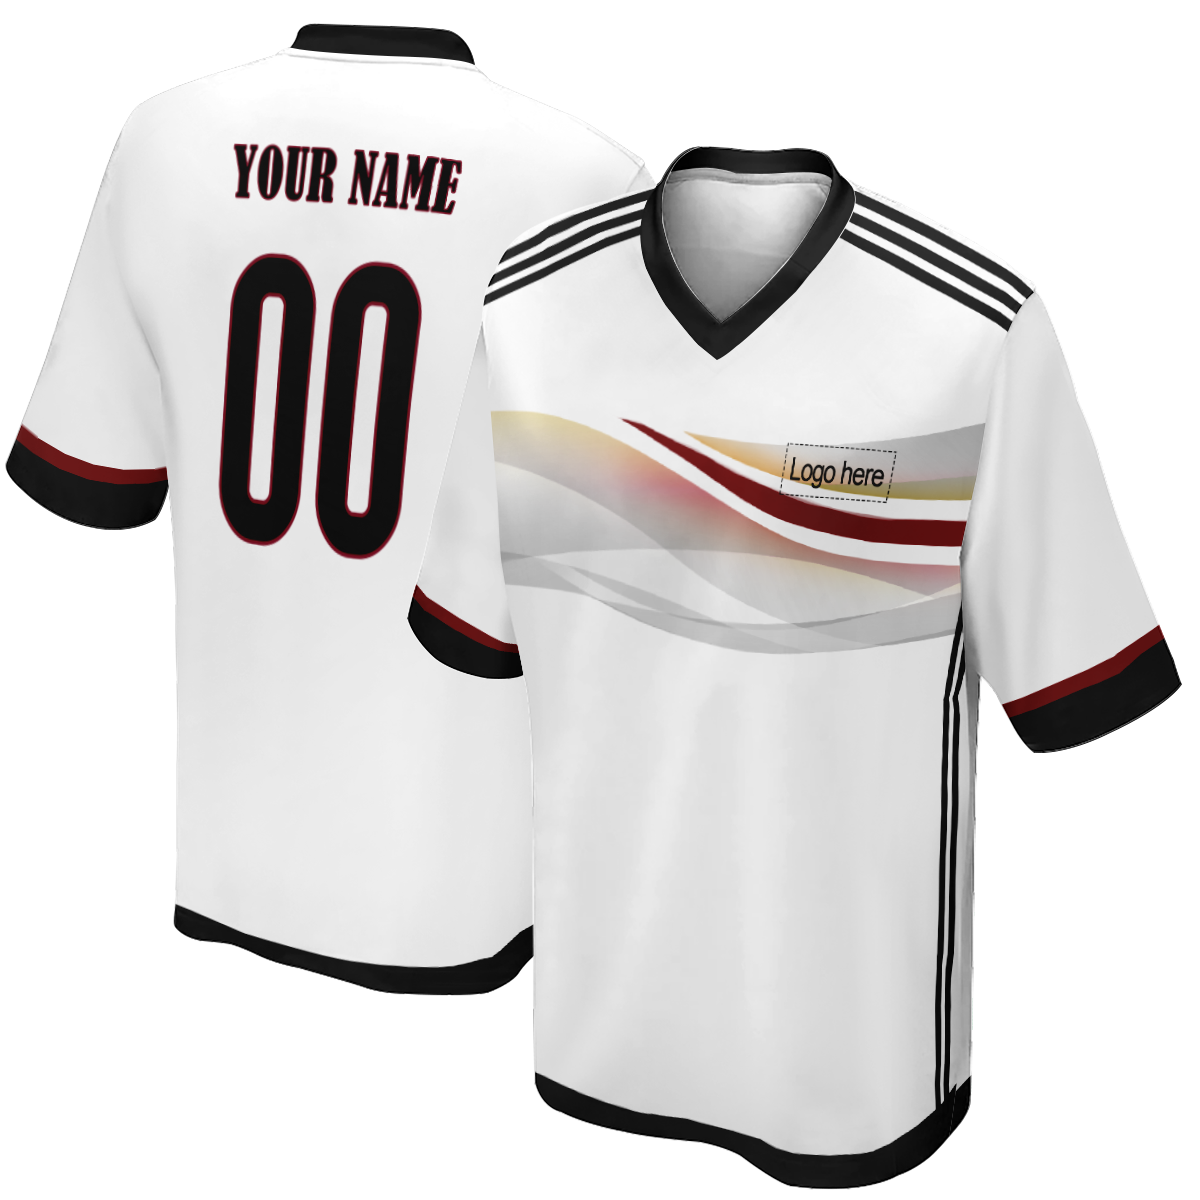 Men's Authentic Germany World Cup Custom Soccer Jersey With Name